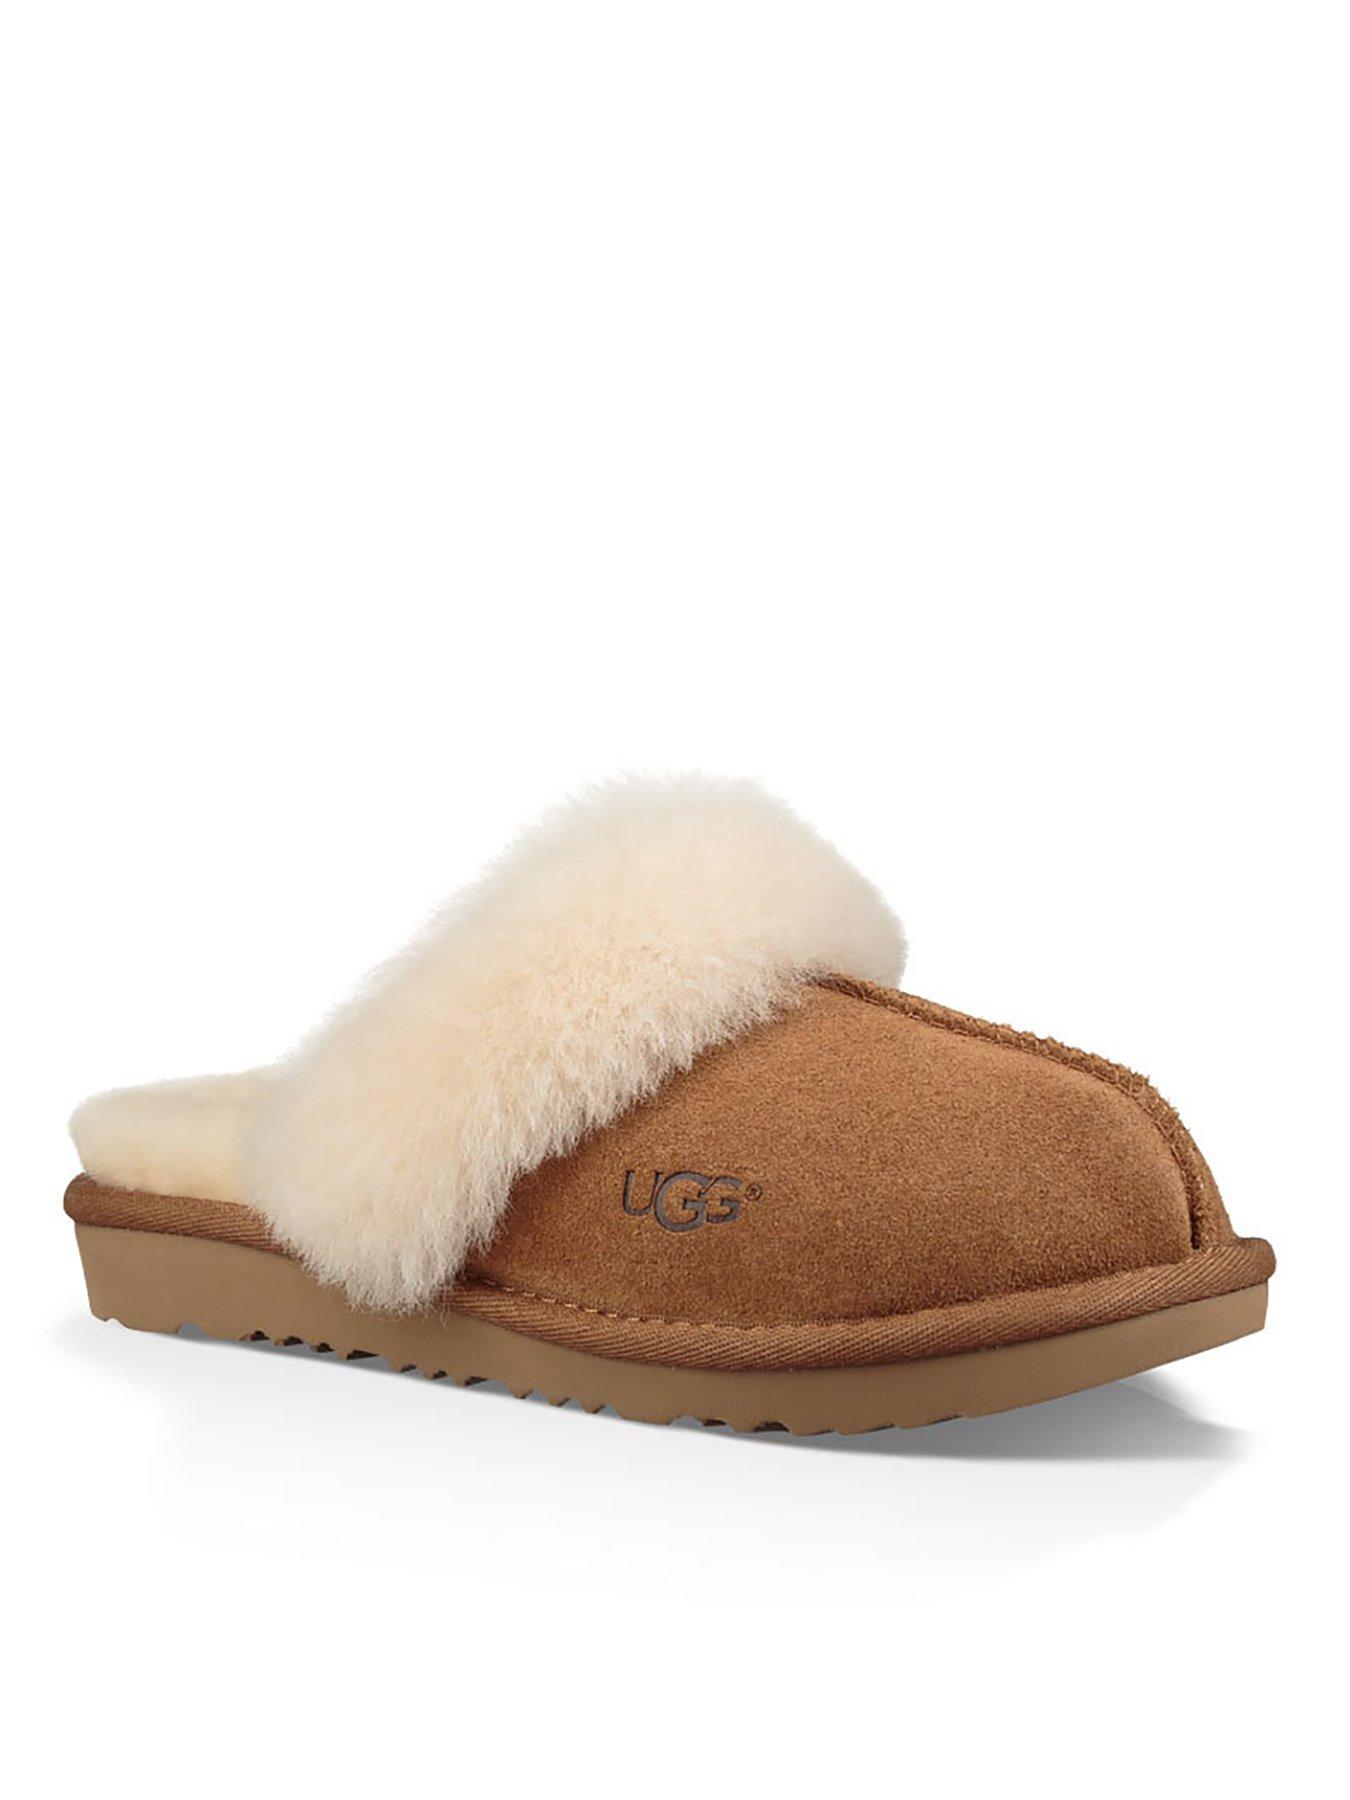 ugg slippers junior size 5